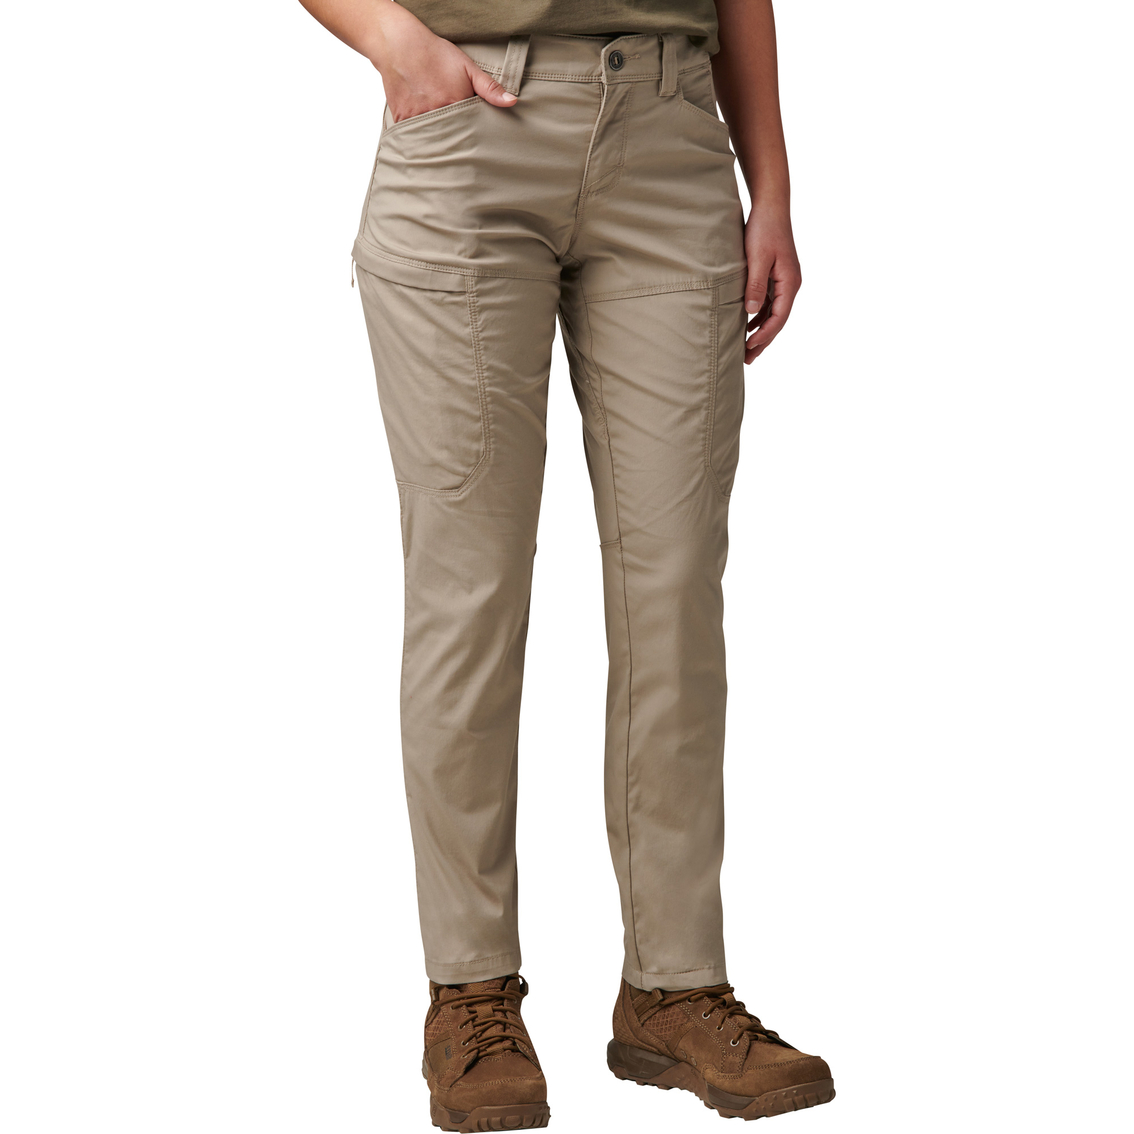 5.11 Spire Pants - Image 2 of 4